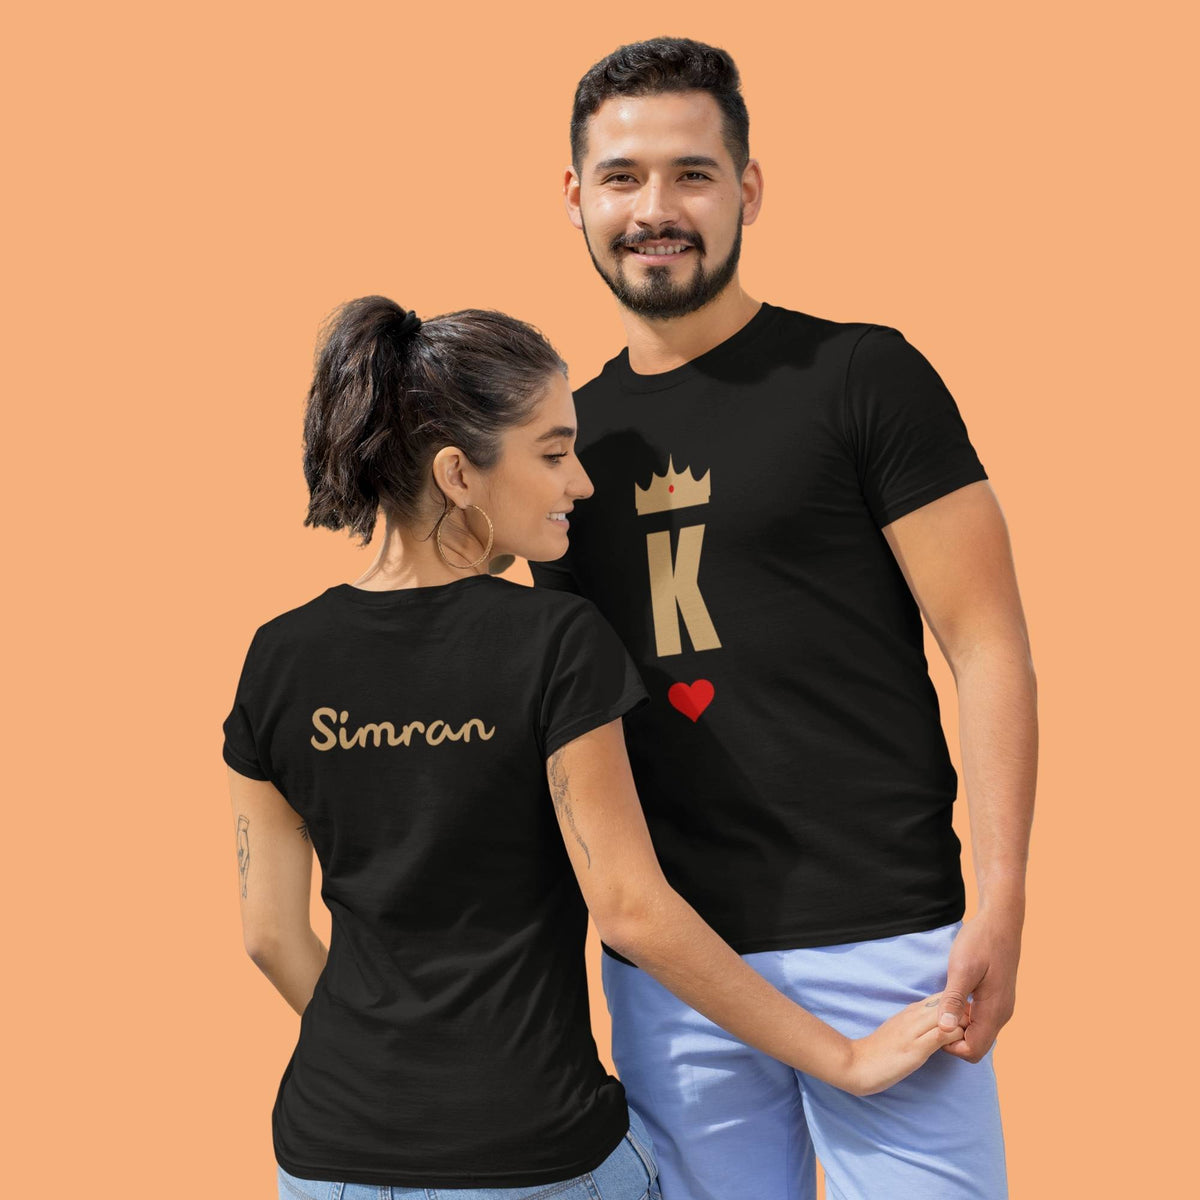 q-for-queen-K-for-king-couple-tshirt-with-front-and-back-print-customizable-black-color-premium-quality-gogirgit